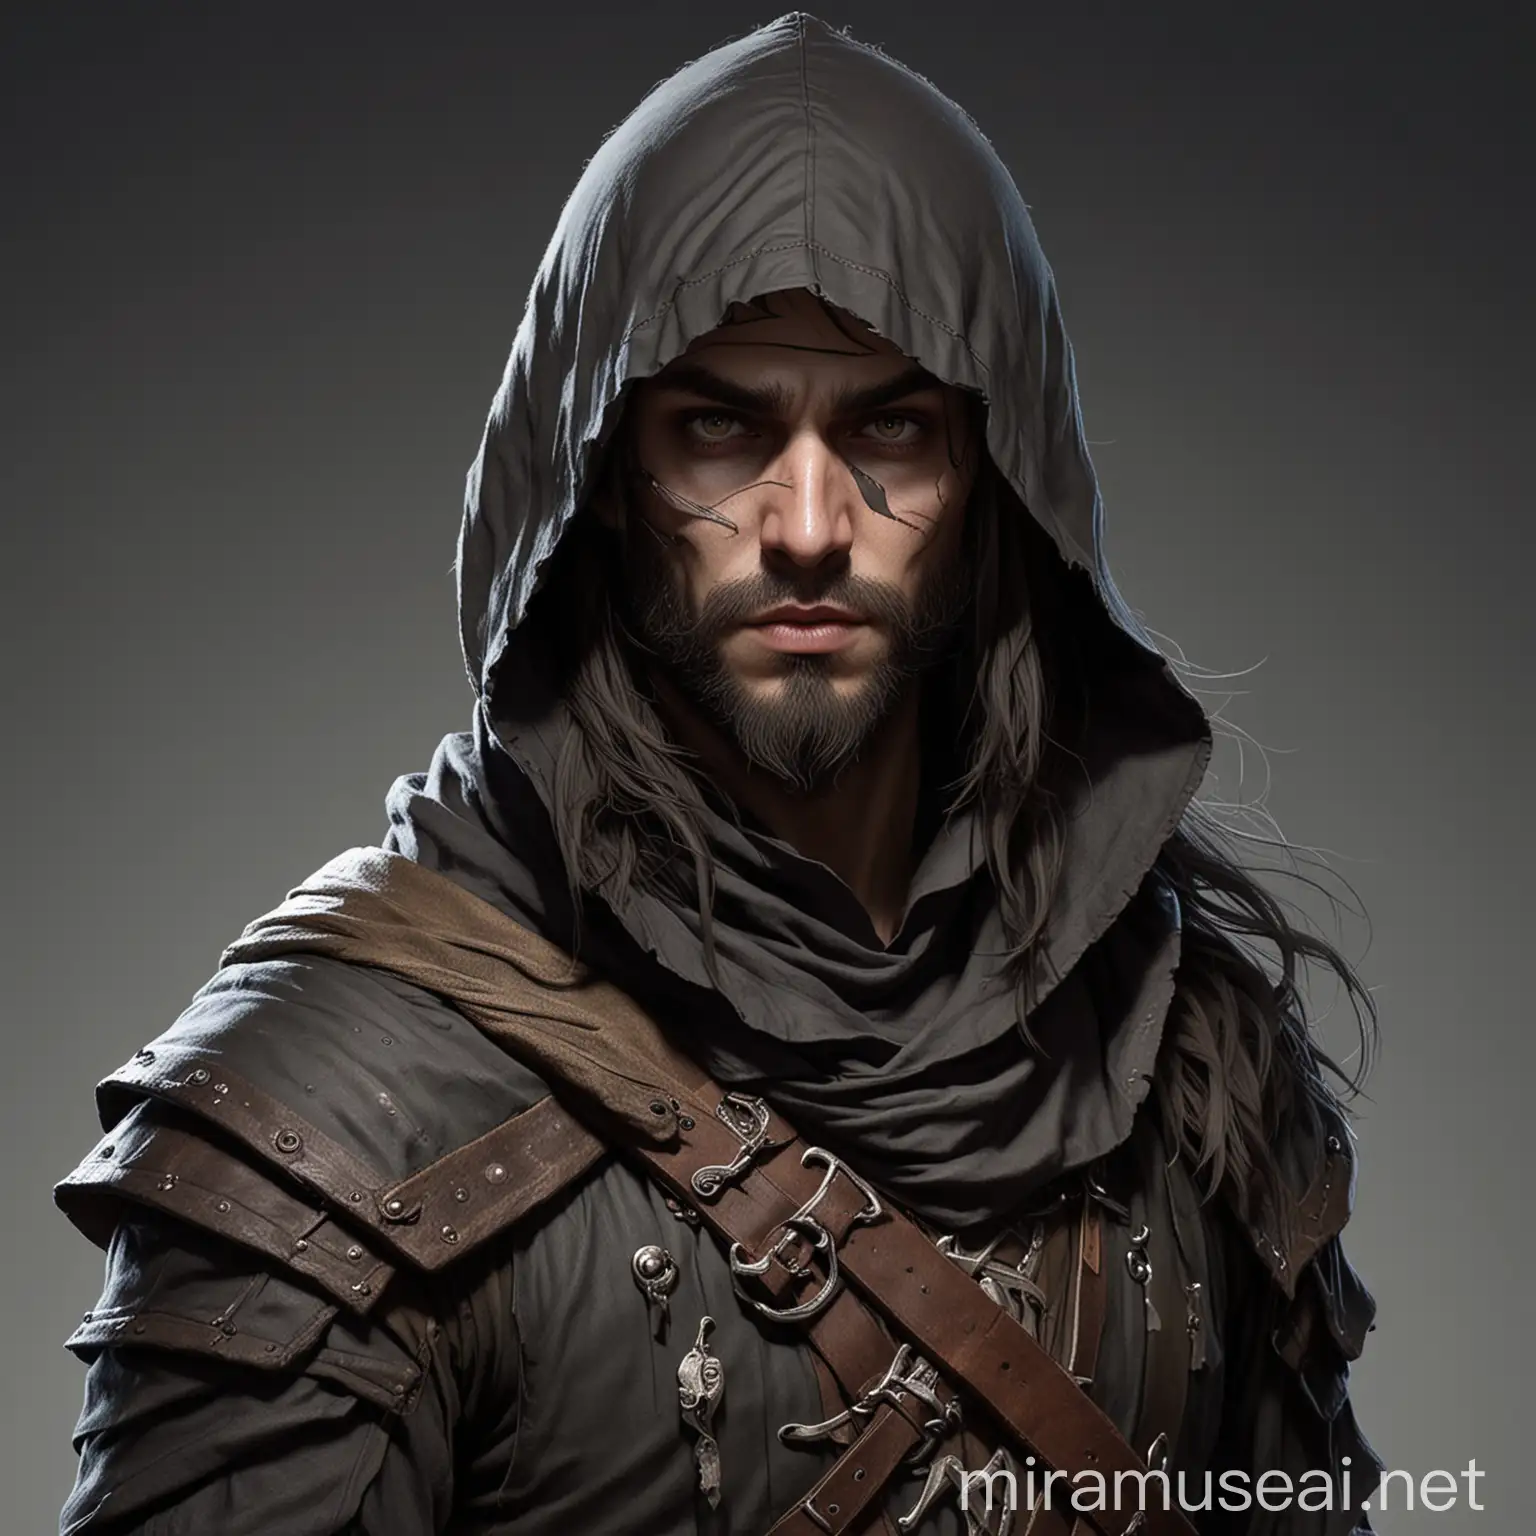 D&D character half elf rogue, assassin, in his twenties, with medium long beard, long hair and a scar on his eye. Dressed with a hood and a face mask